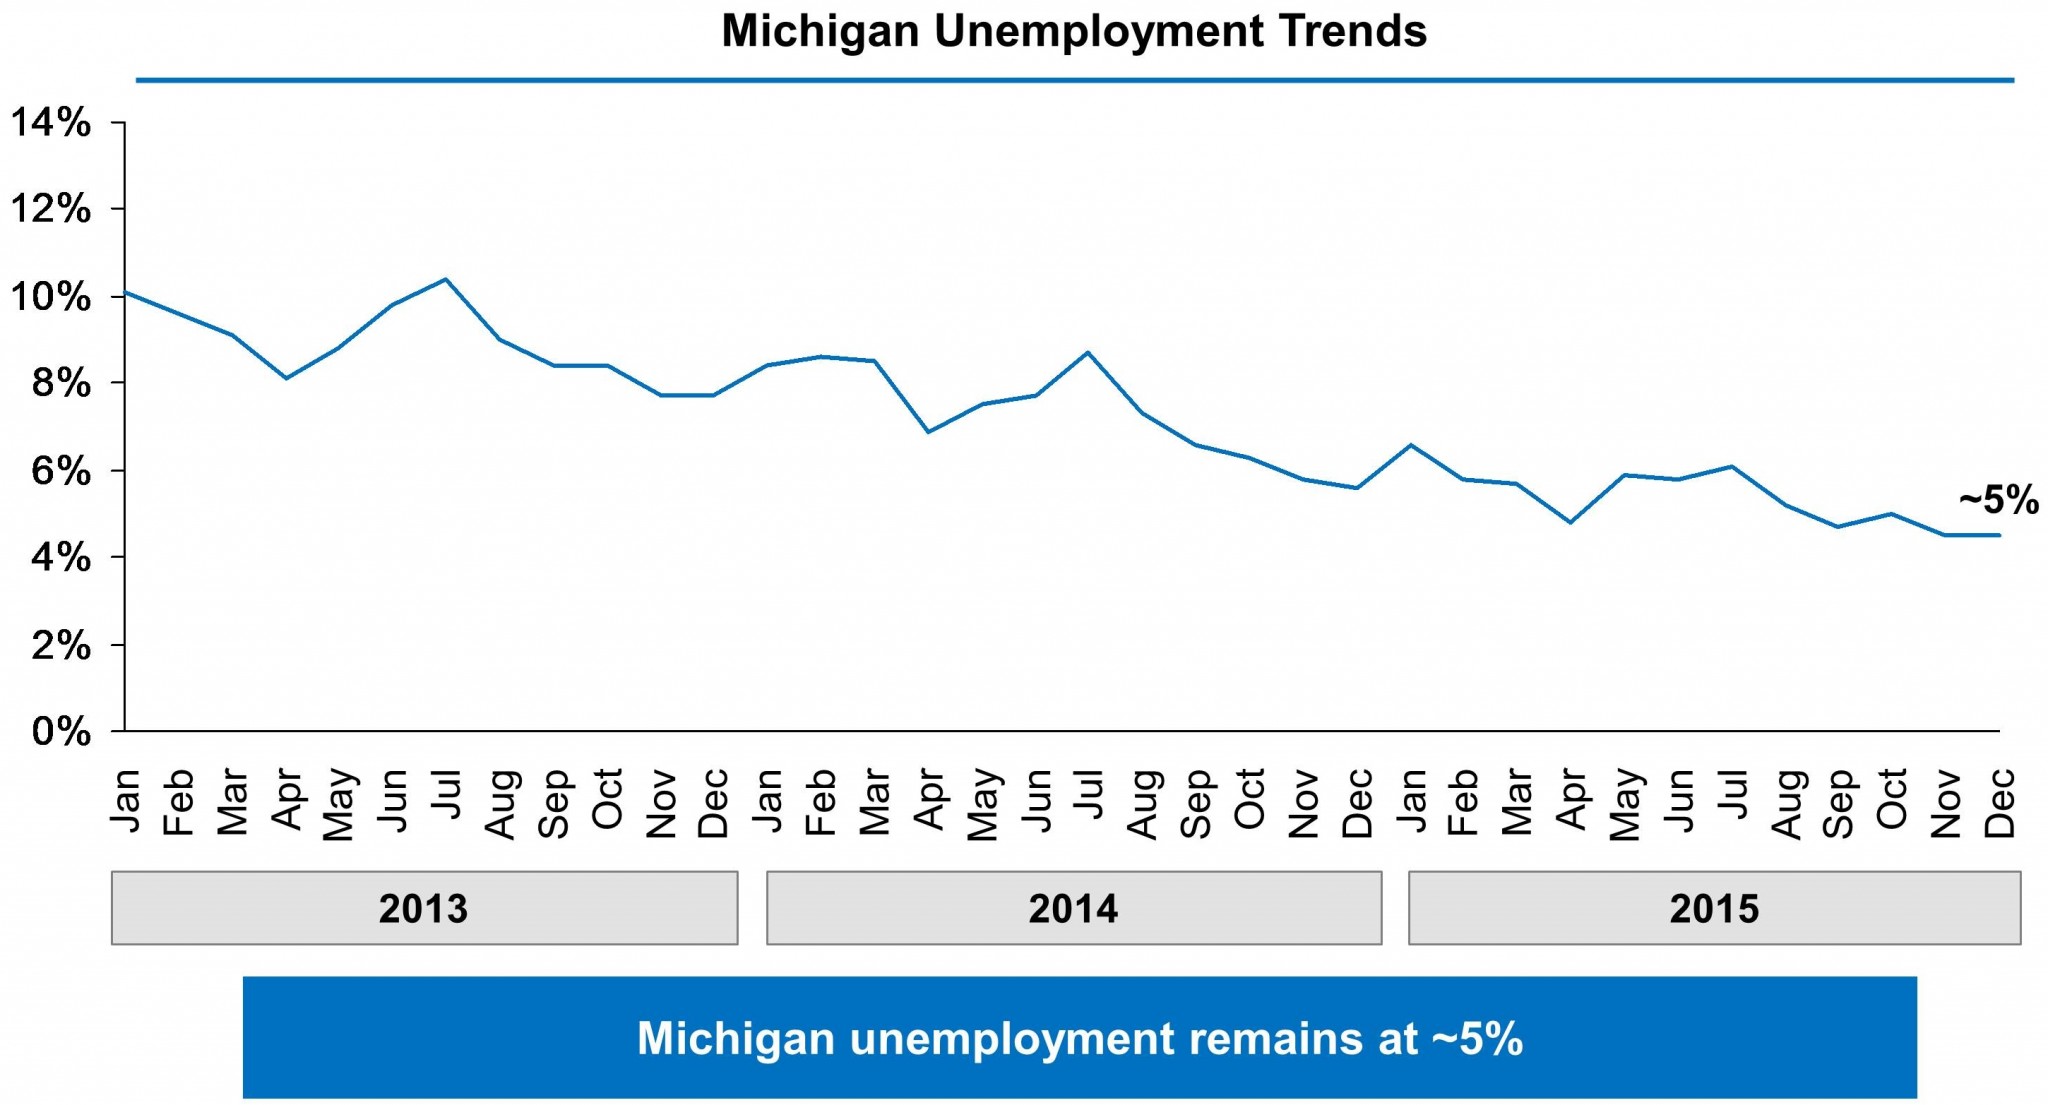 Chart showing Michigan’s unemployment rate falling from 10% in January 2013 to approximately 5% in December 2015.